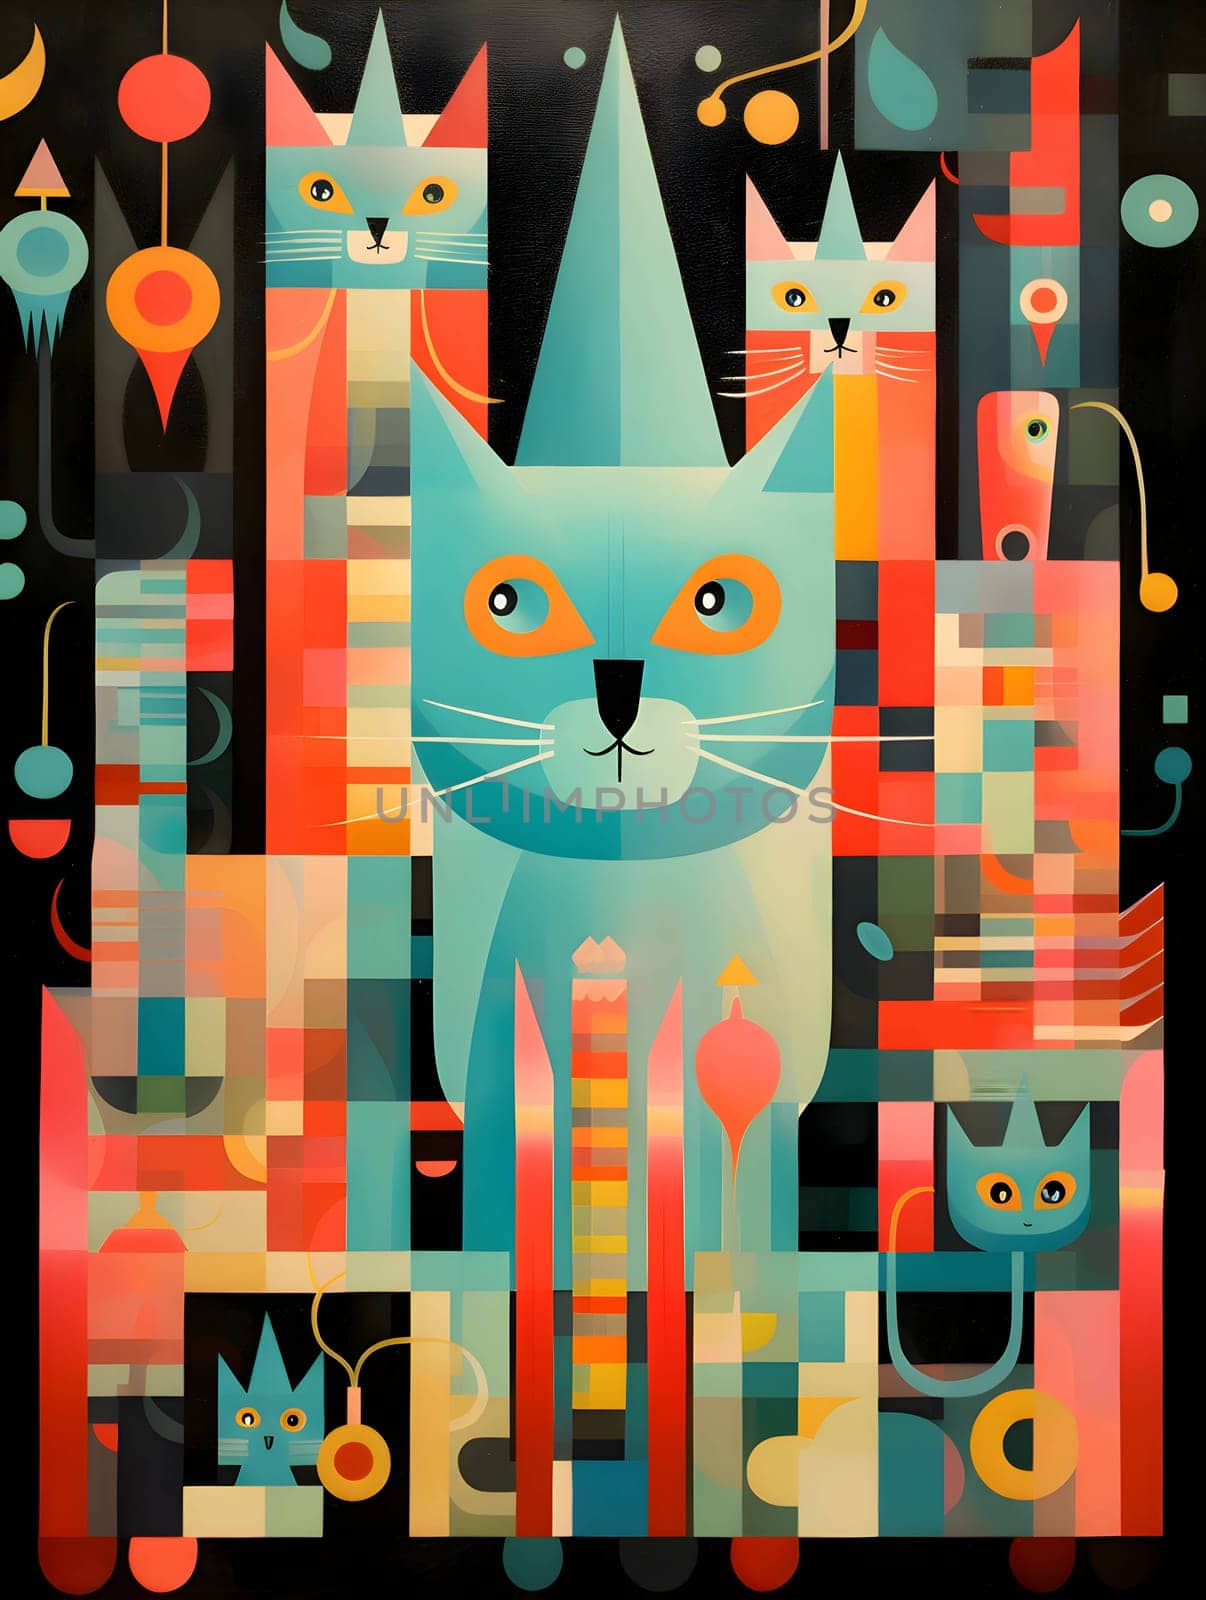 Abstract illustration: abstract background with cats, vector illustration, eps10.